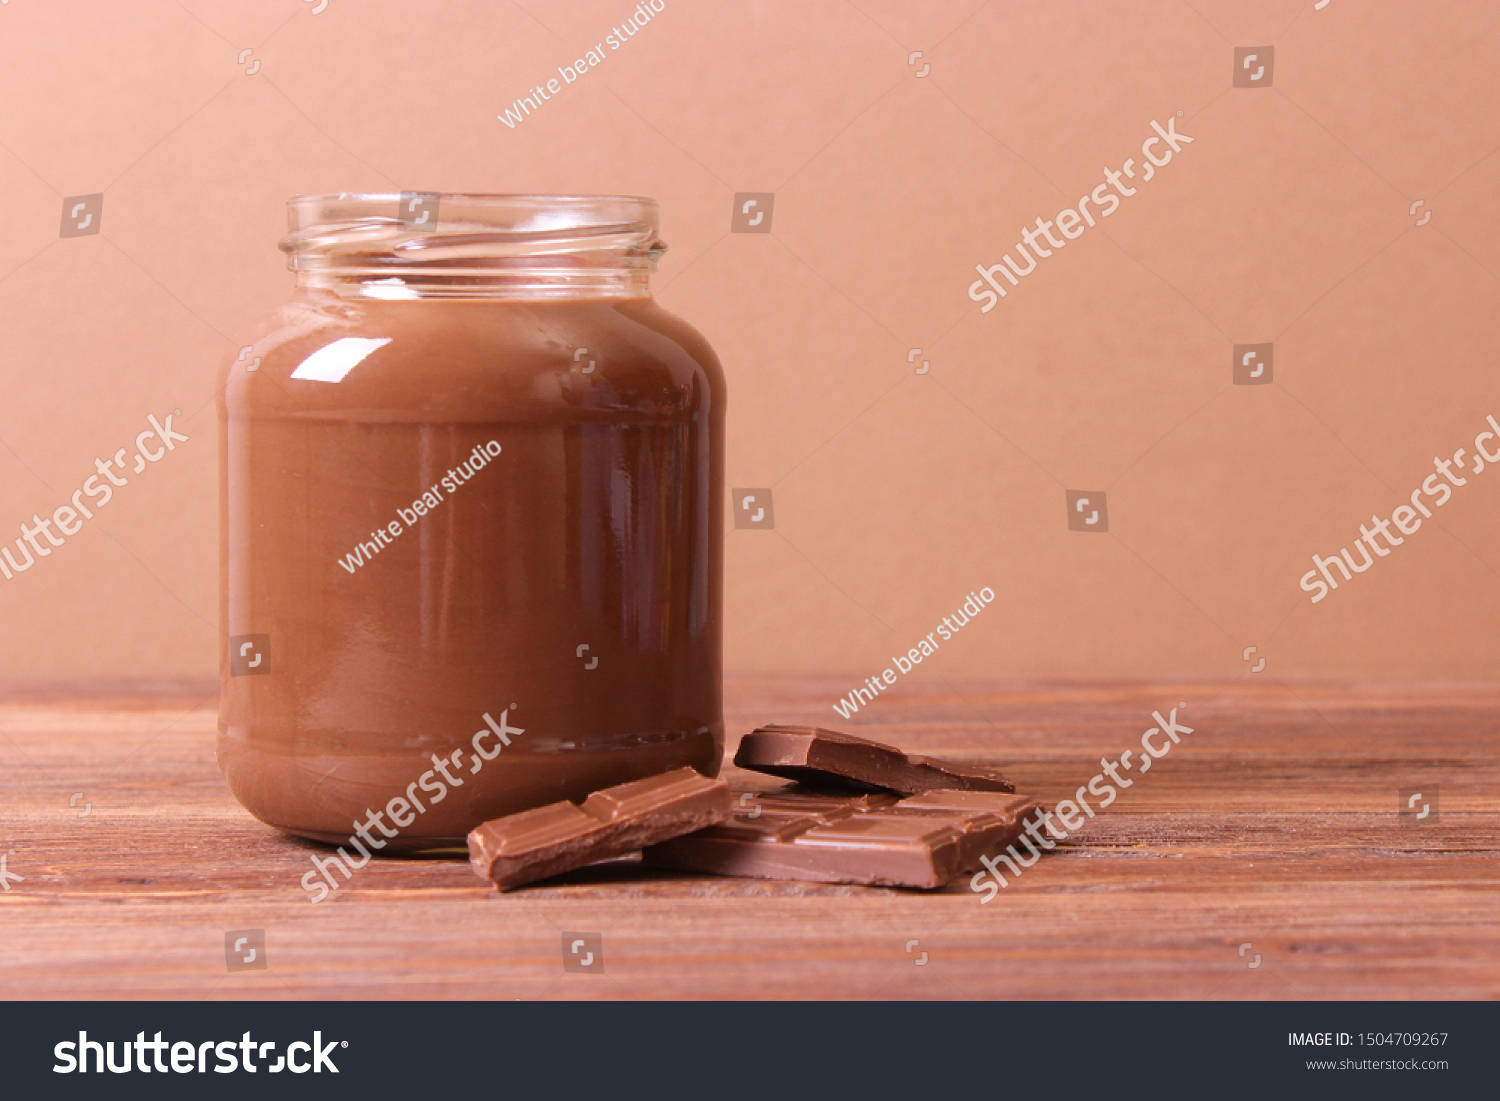 Download Chocolate Paste Glass Jar On Colored Stock Photo Edit Now 1504709267 Yellowimages Mockups